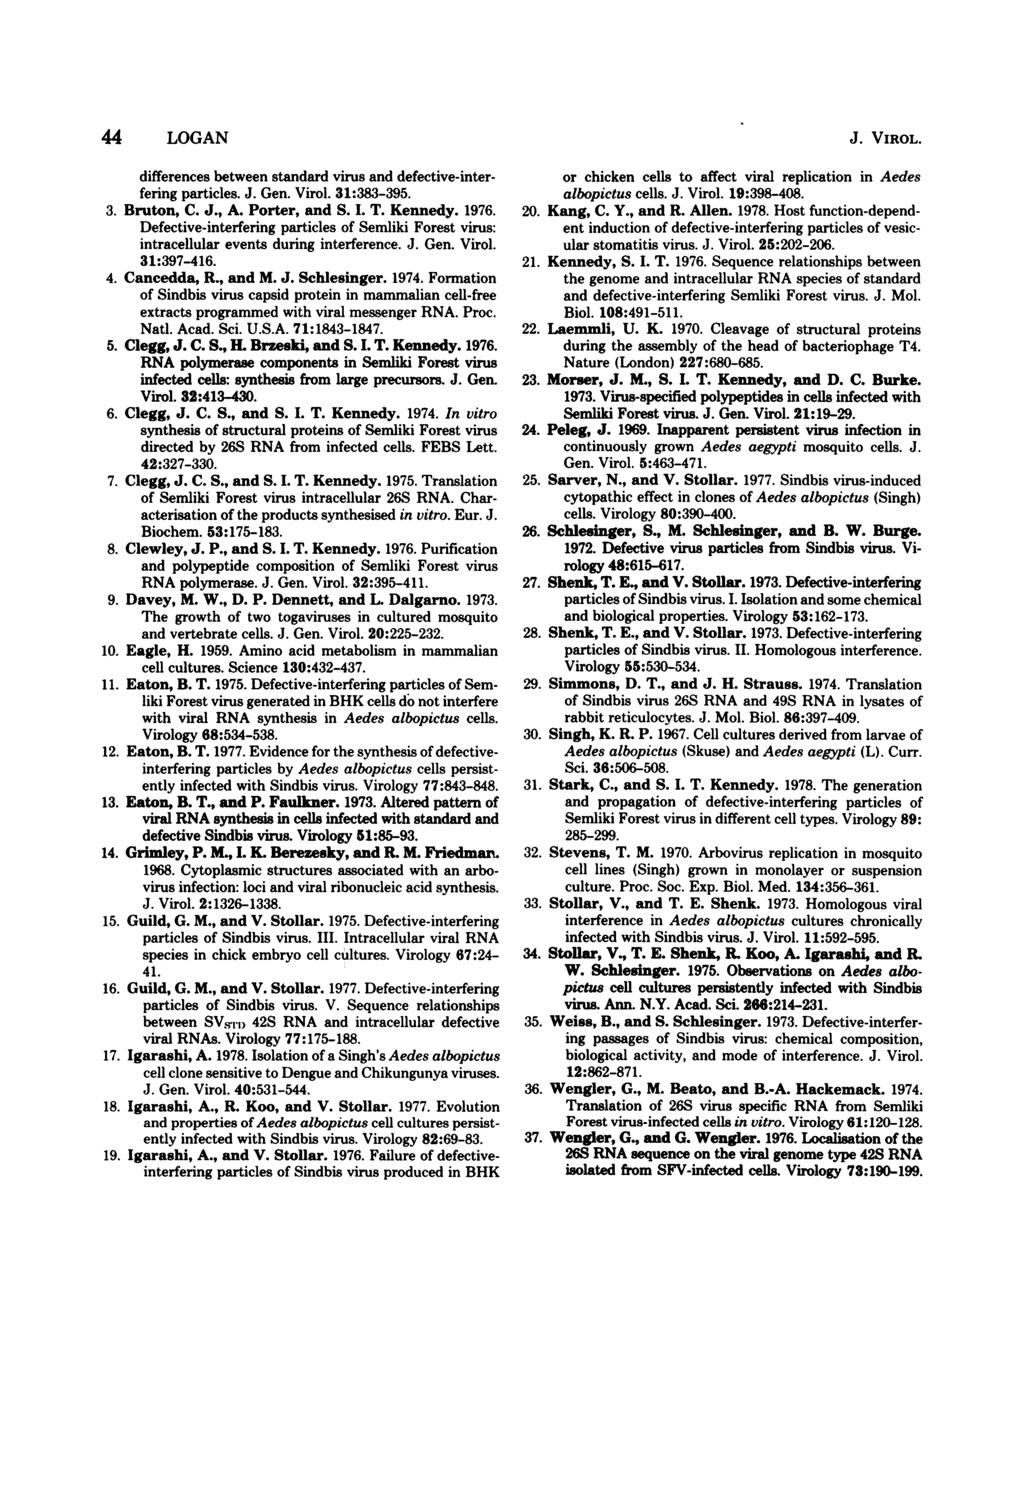 44 LOGAN differences between standard virus and defective-interfering particles. J. Gen. Virol. 31:383-395. 3. Bruton, C. J., A. Porter, and S. I. T. Kennedy. 1976.